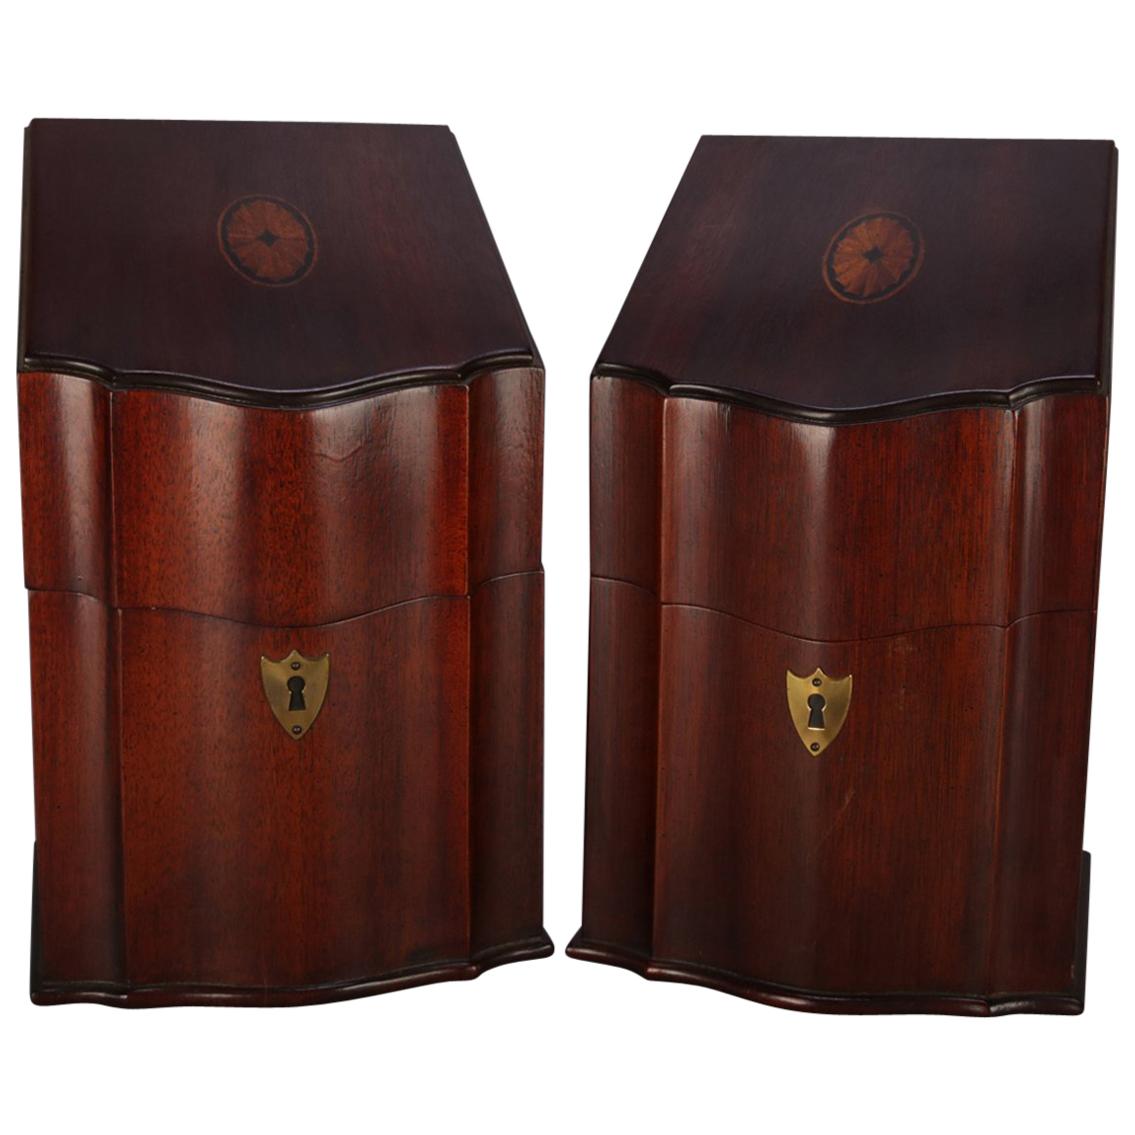 Pair of Antique English Georgian Style Inlaid Mahogany and Bronze Knife Boxes